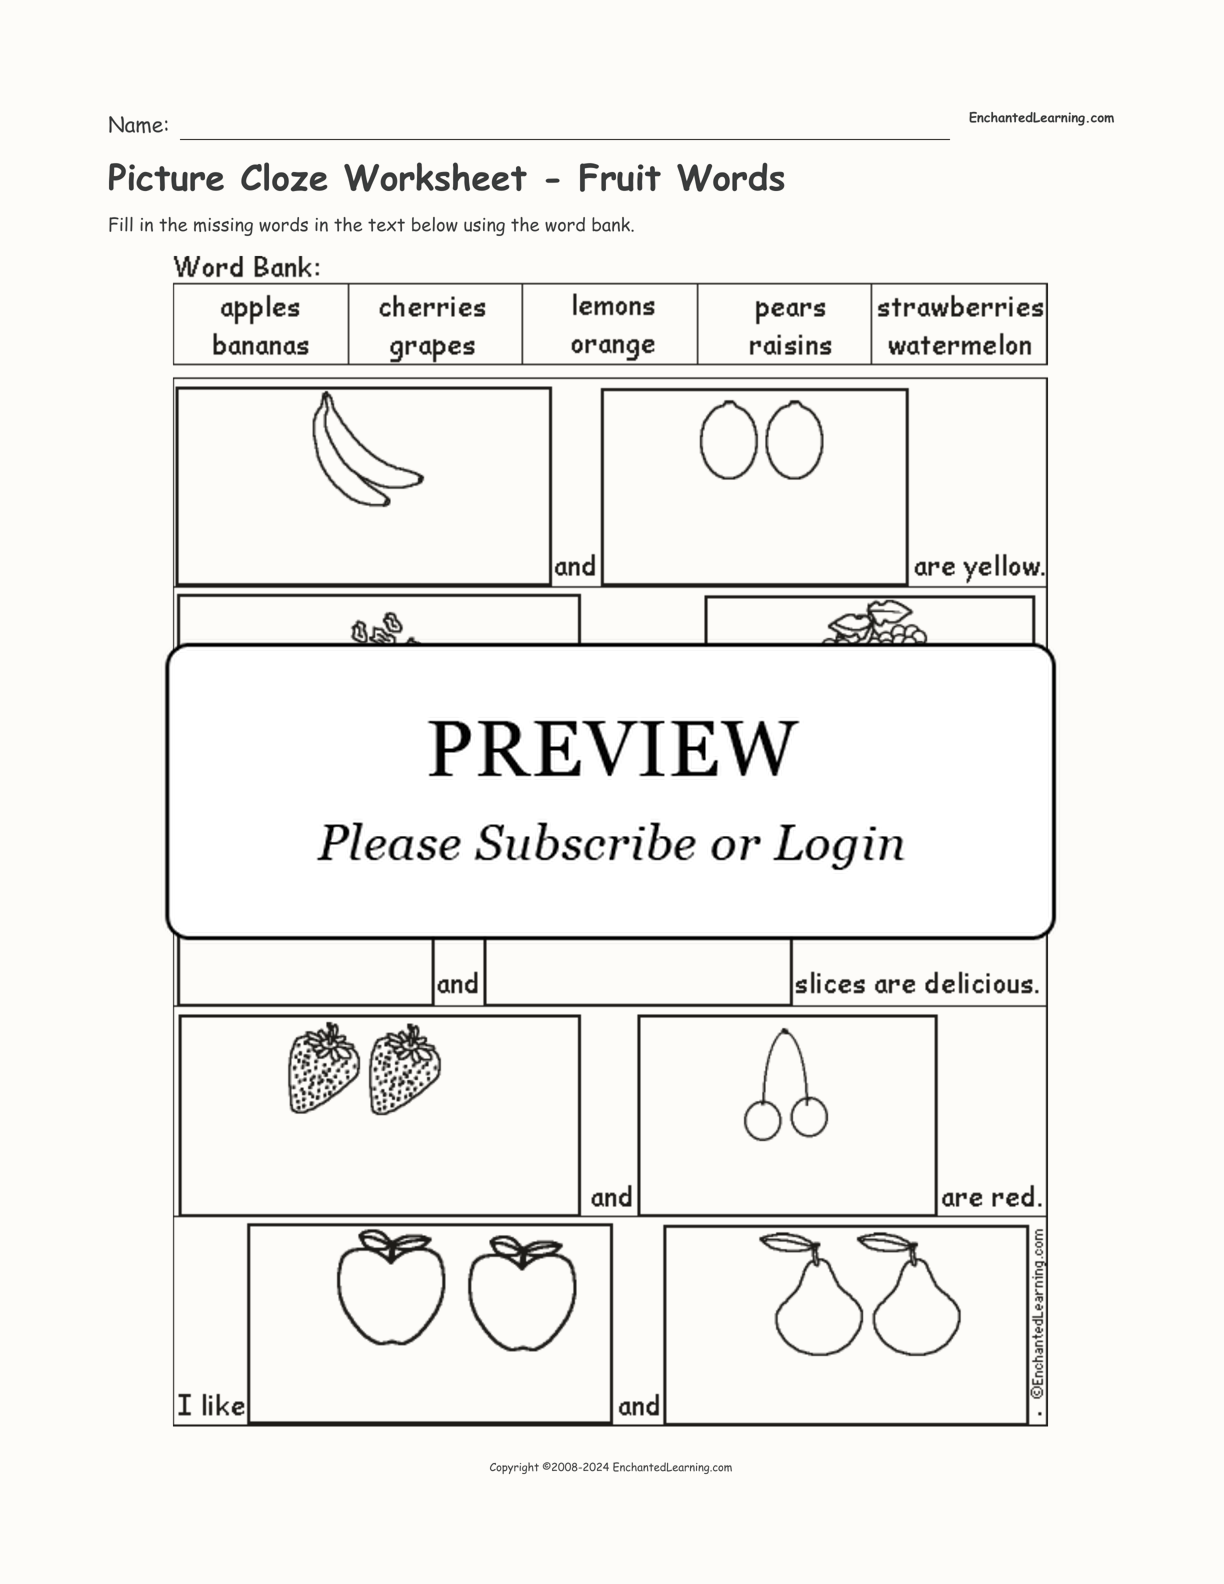 Picture Cloze Worksheet - Fruit Words interactive worksheet page 1